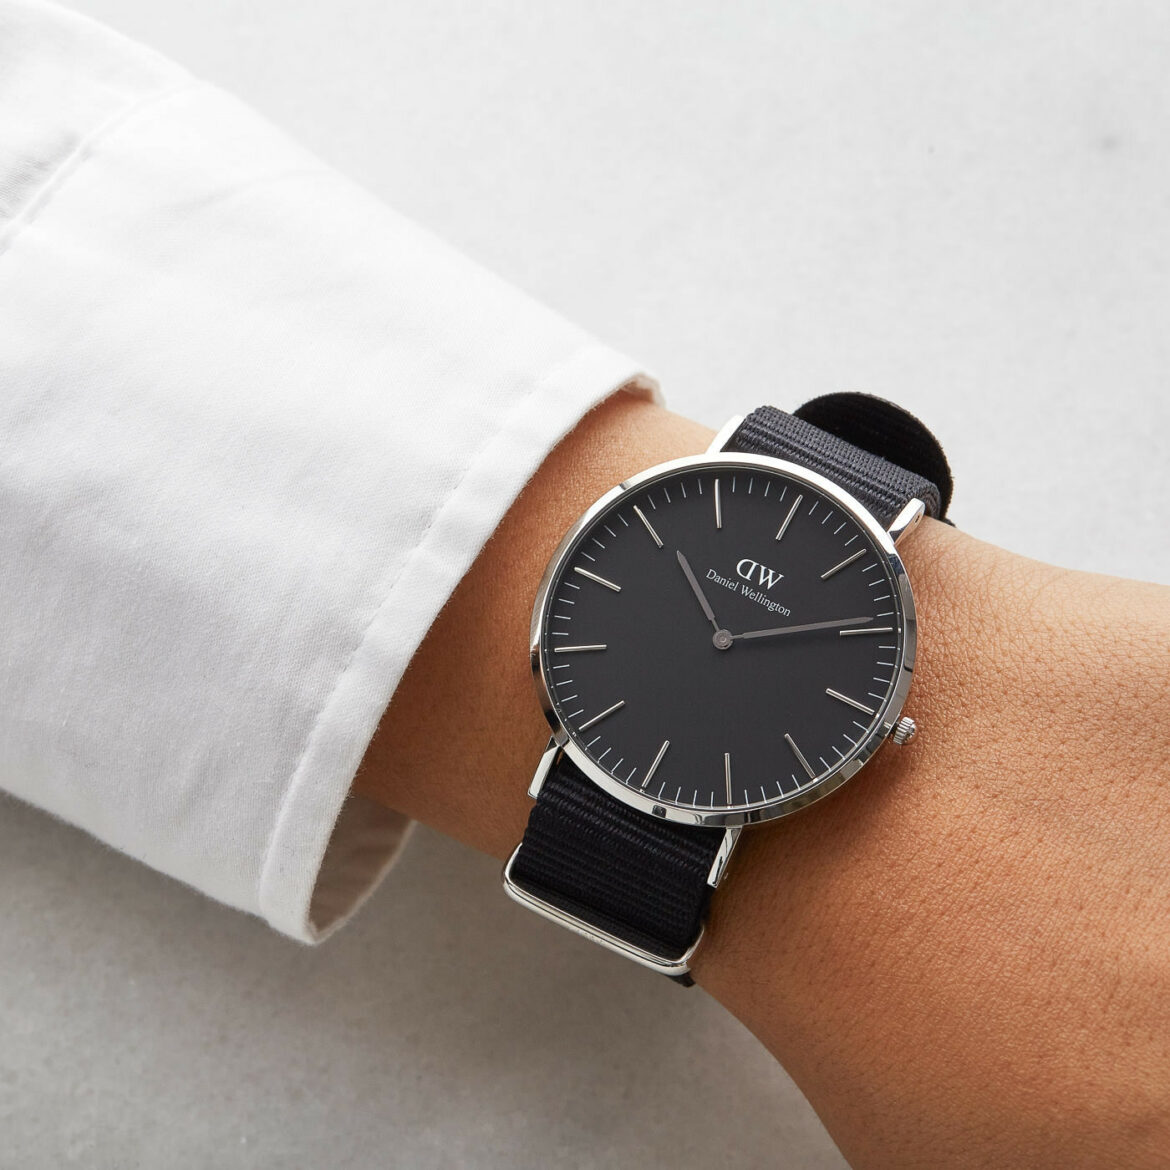 The Complete Guide to Daniel Wellington Watches